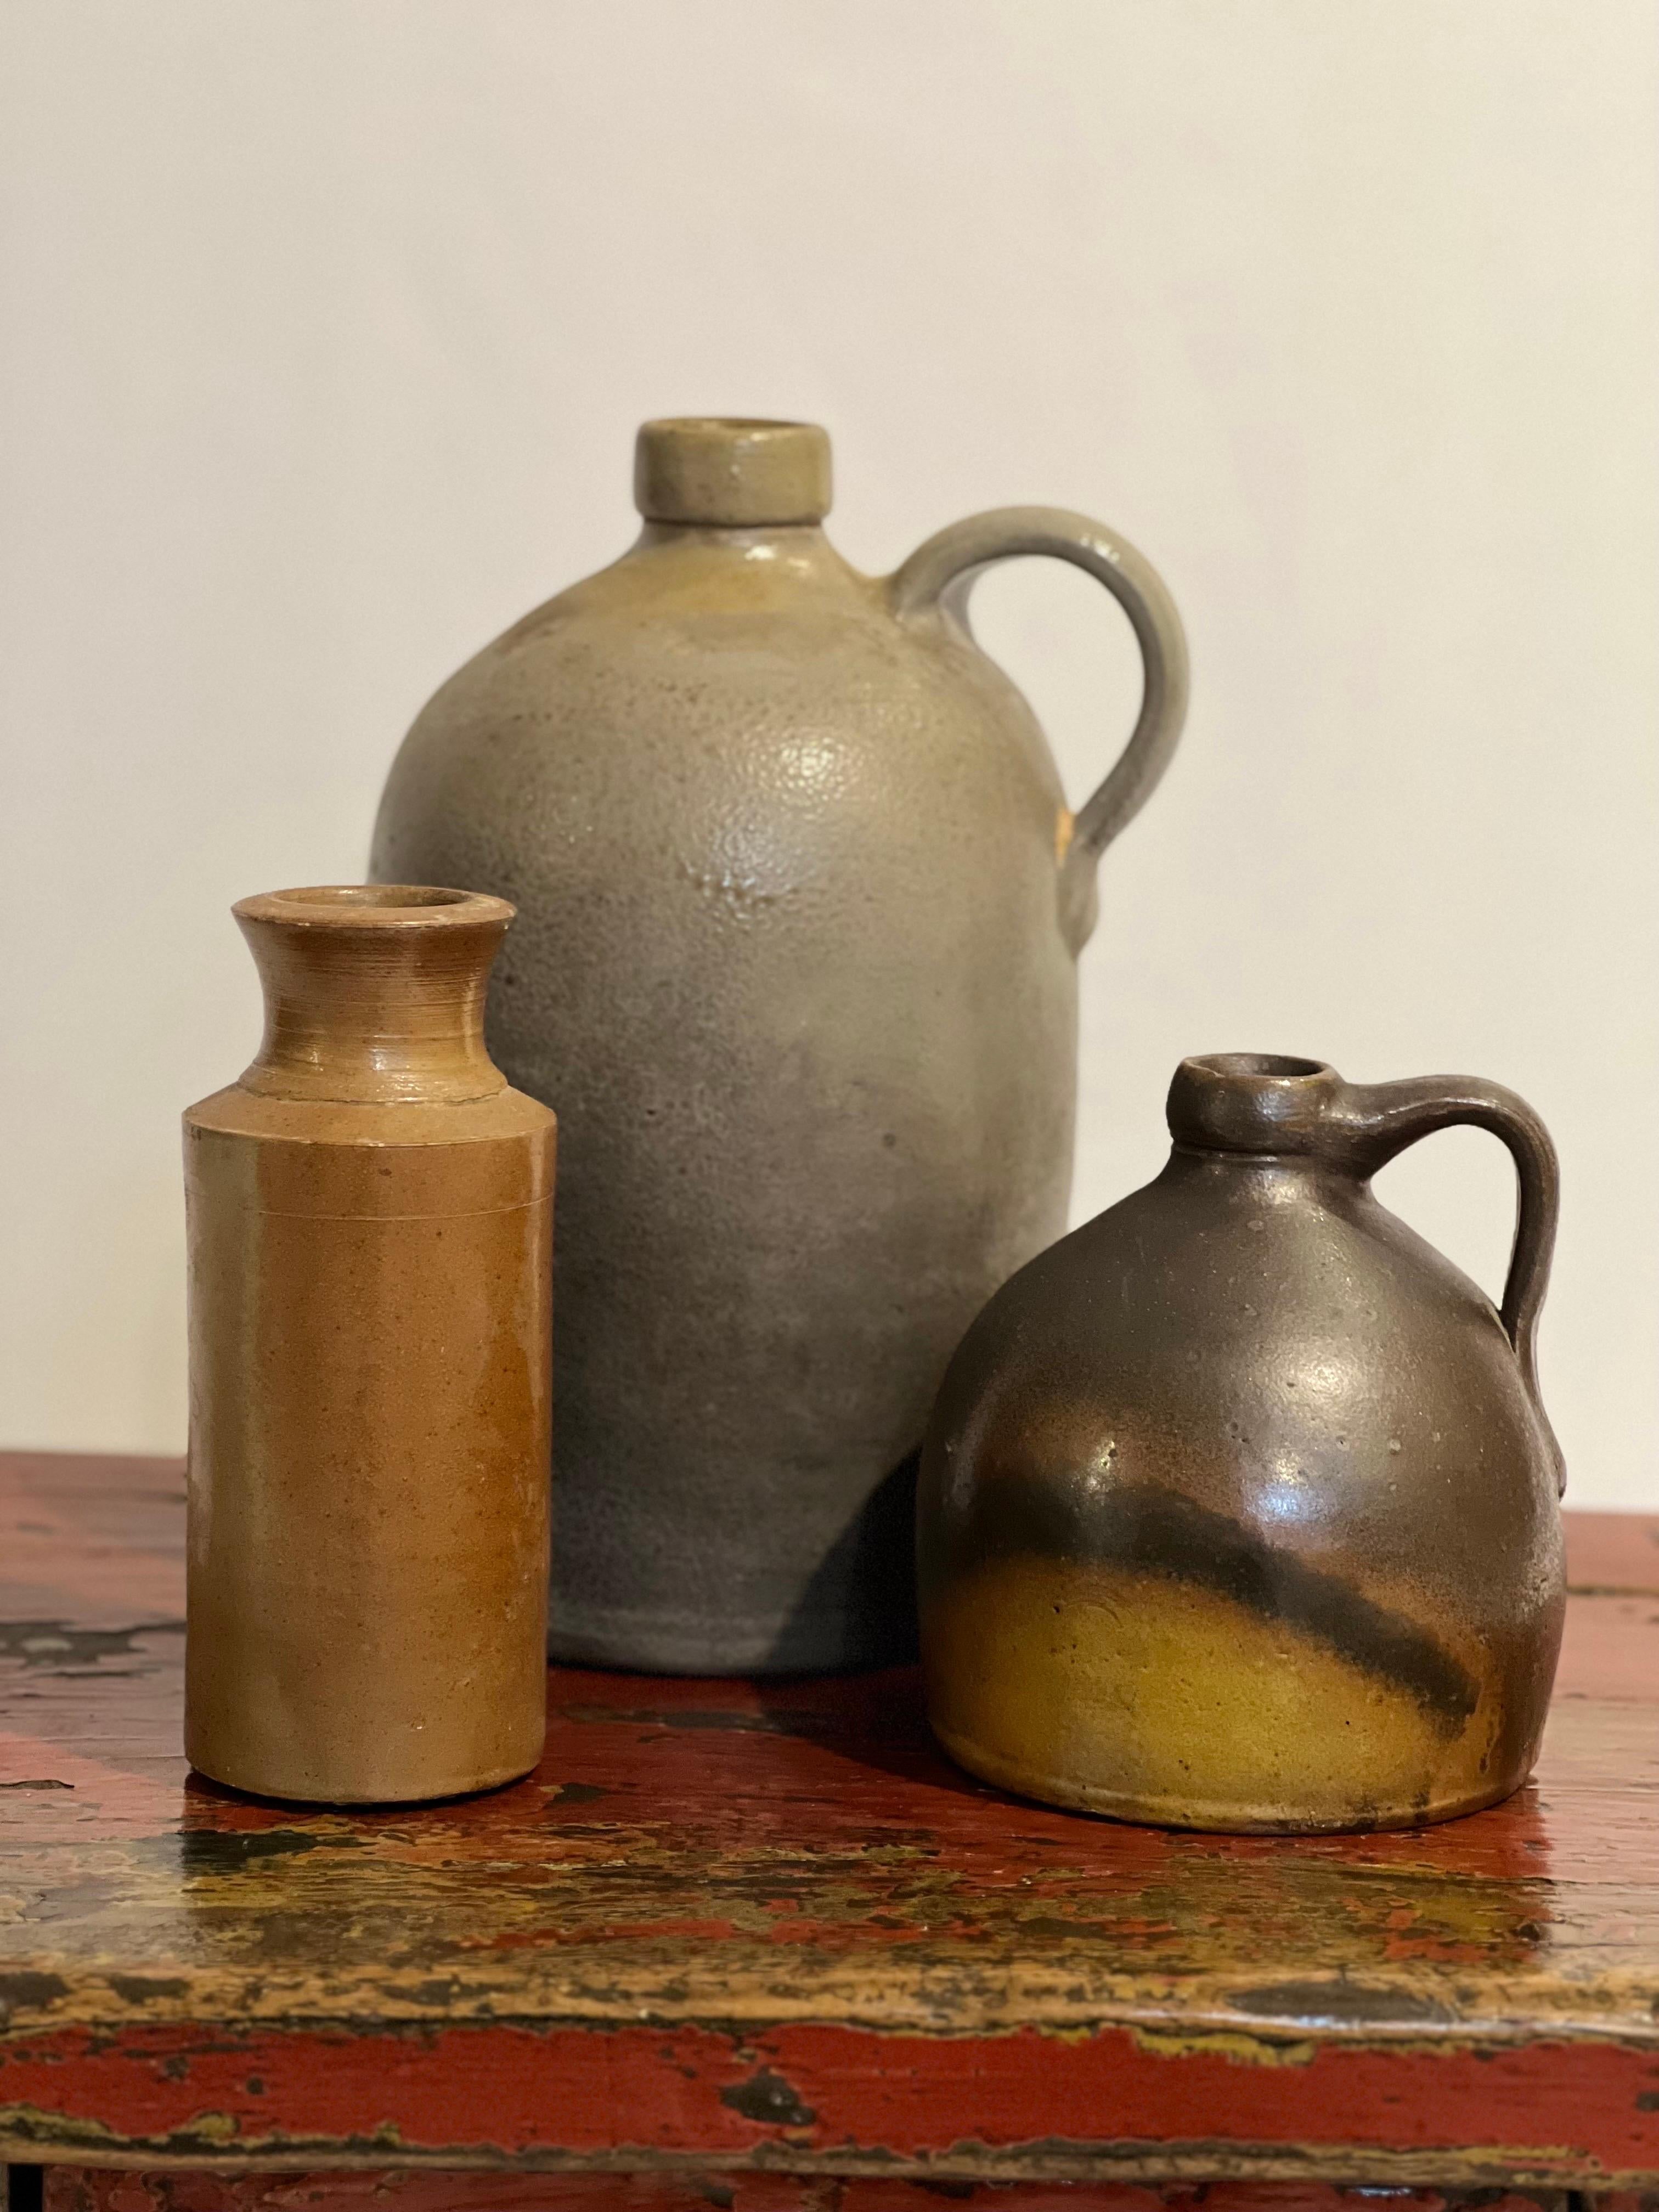 A set of 19th century salt glazed jugs and blacking bottle.

A charming, handcrafted stoneware trio offering a large jug, whisky jug and blacking bottle which was used to store stove blacking and other cleaning materials. The small assortment has a